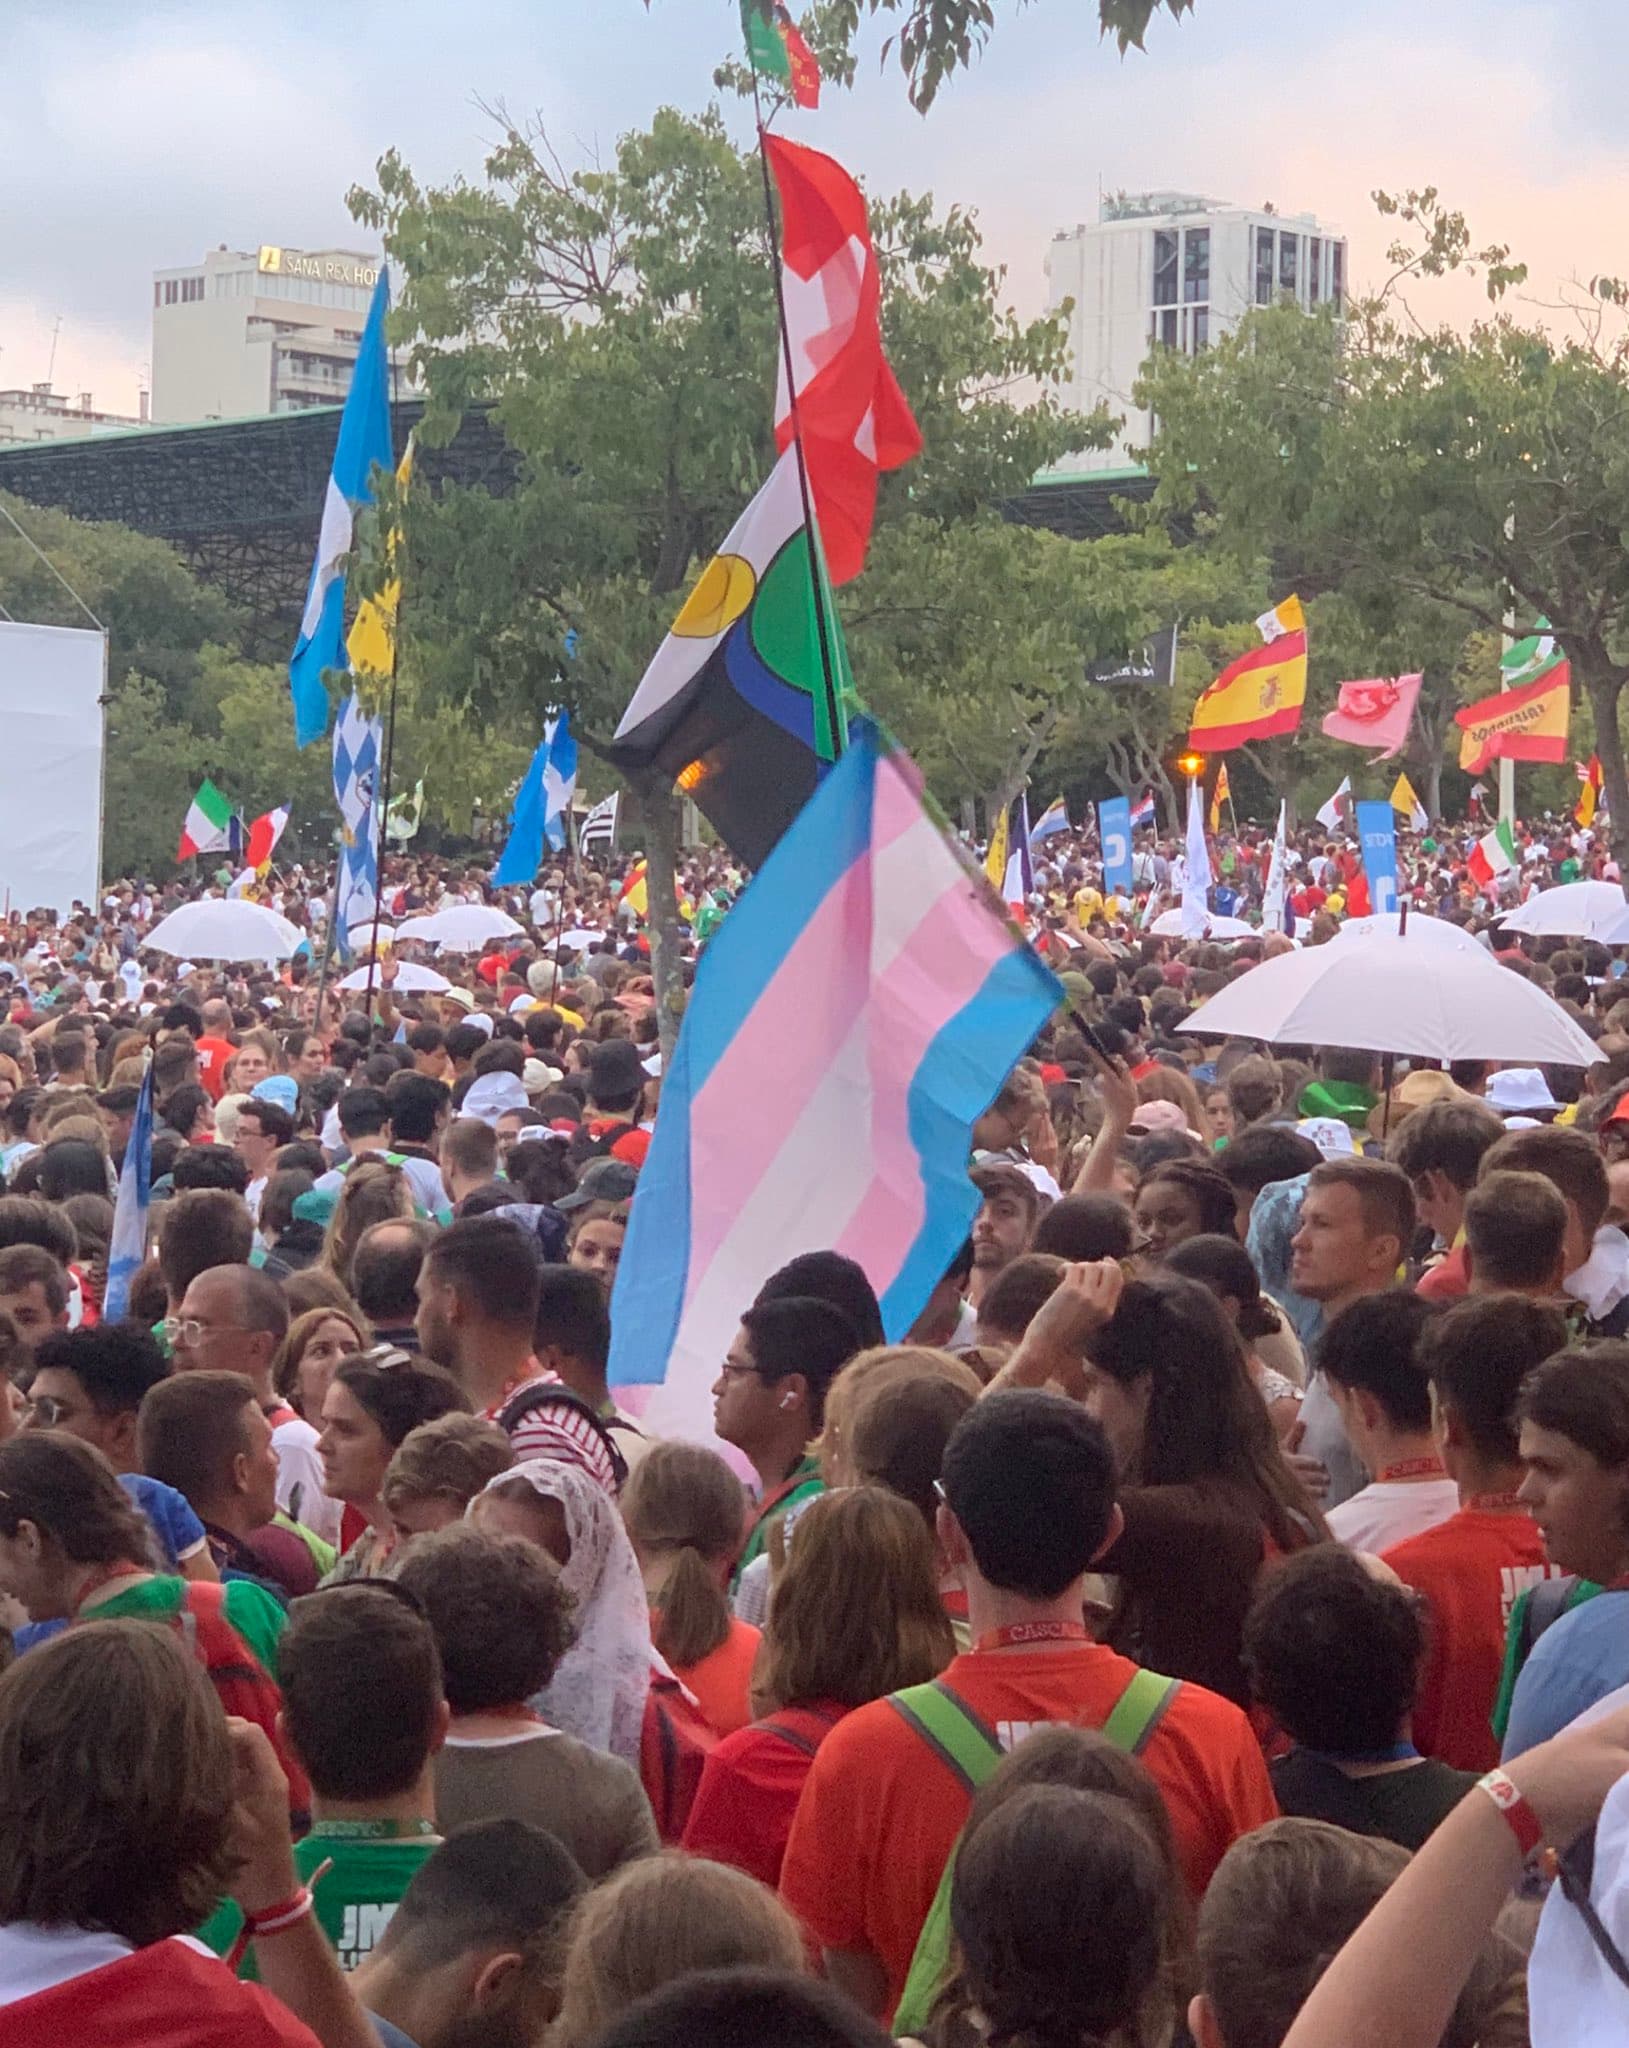 a picture of a a trans flag held up in a crowd, getting weird looks from everyone :3c. photo taken by some transphobe and posted to own me I guess. I am not going to credit him